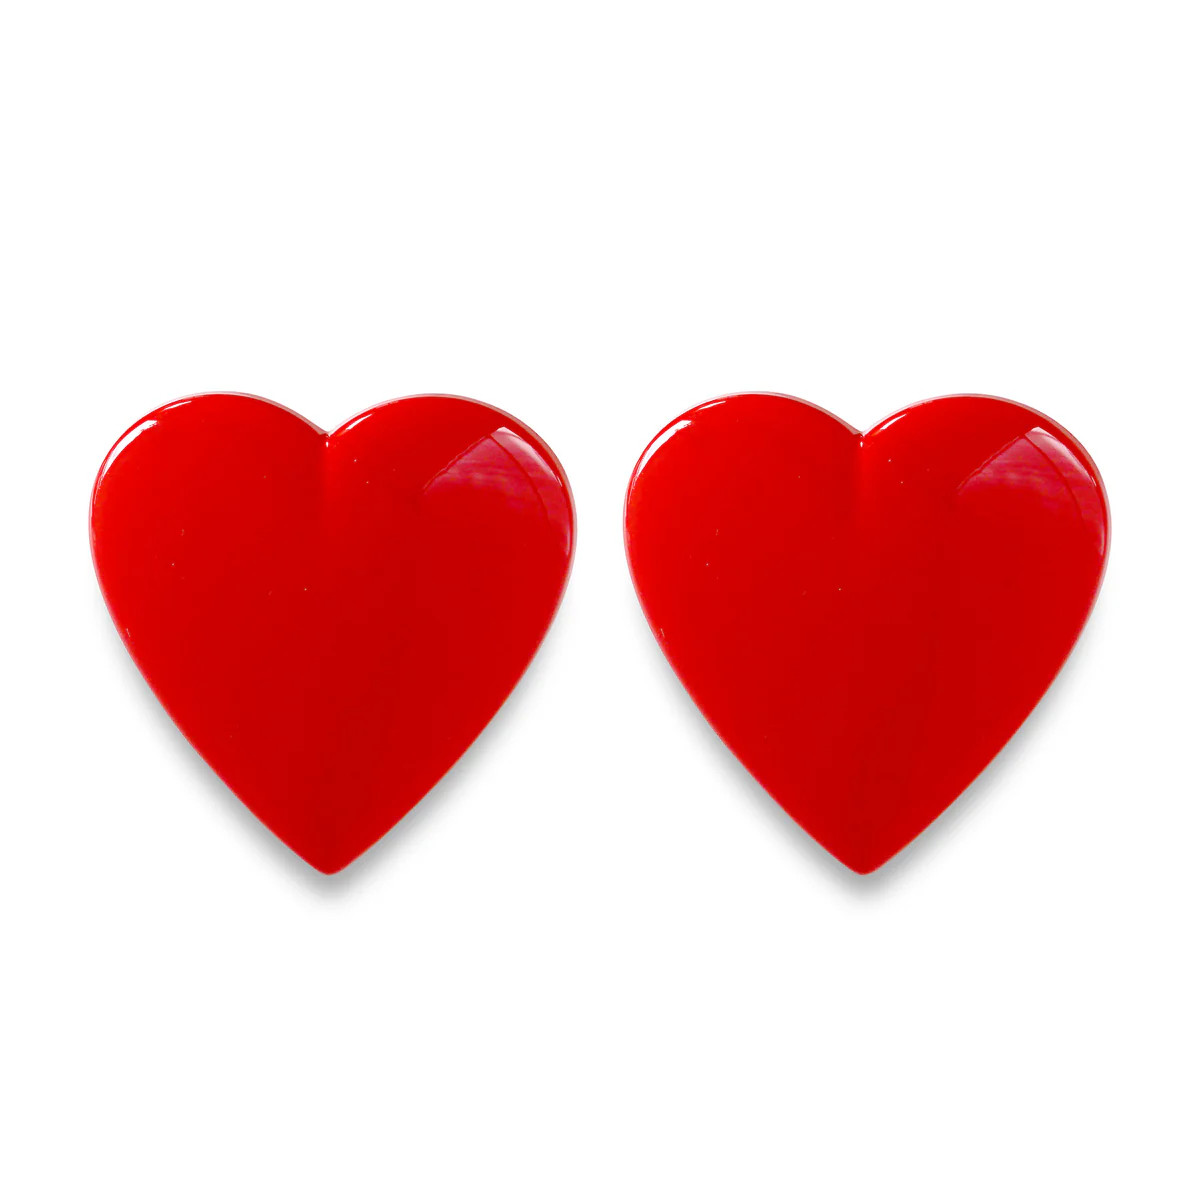 Heartbeat Brooch Clips - Heart Shaped Cherry Red Shoe Clips | VEERAH Designer Vegan Shoes